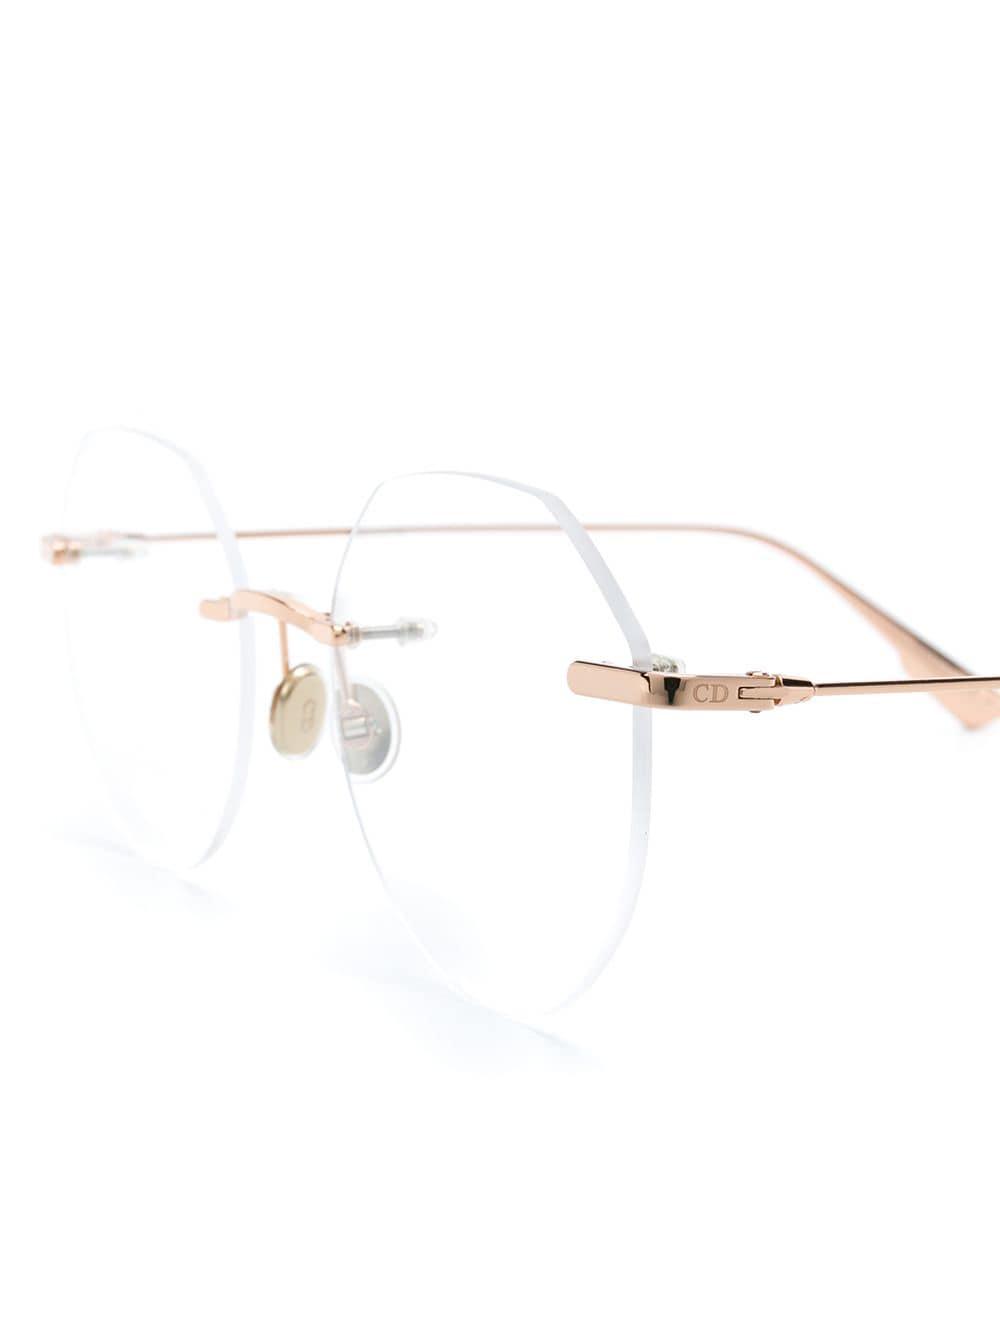 Dior Rimless Round Shaped Glasses in Metallic | Lyst